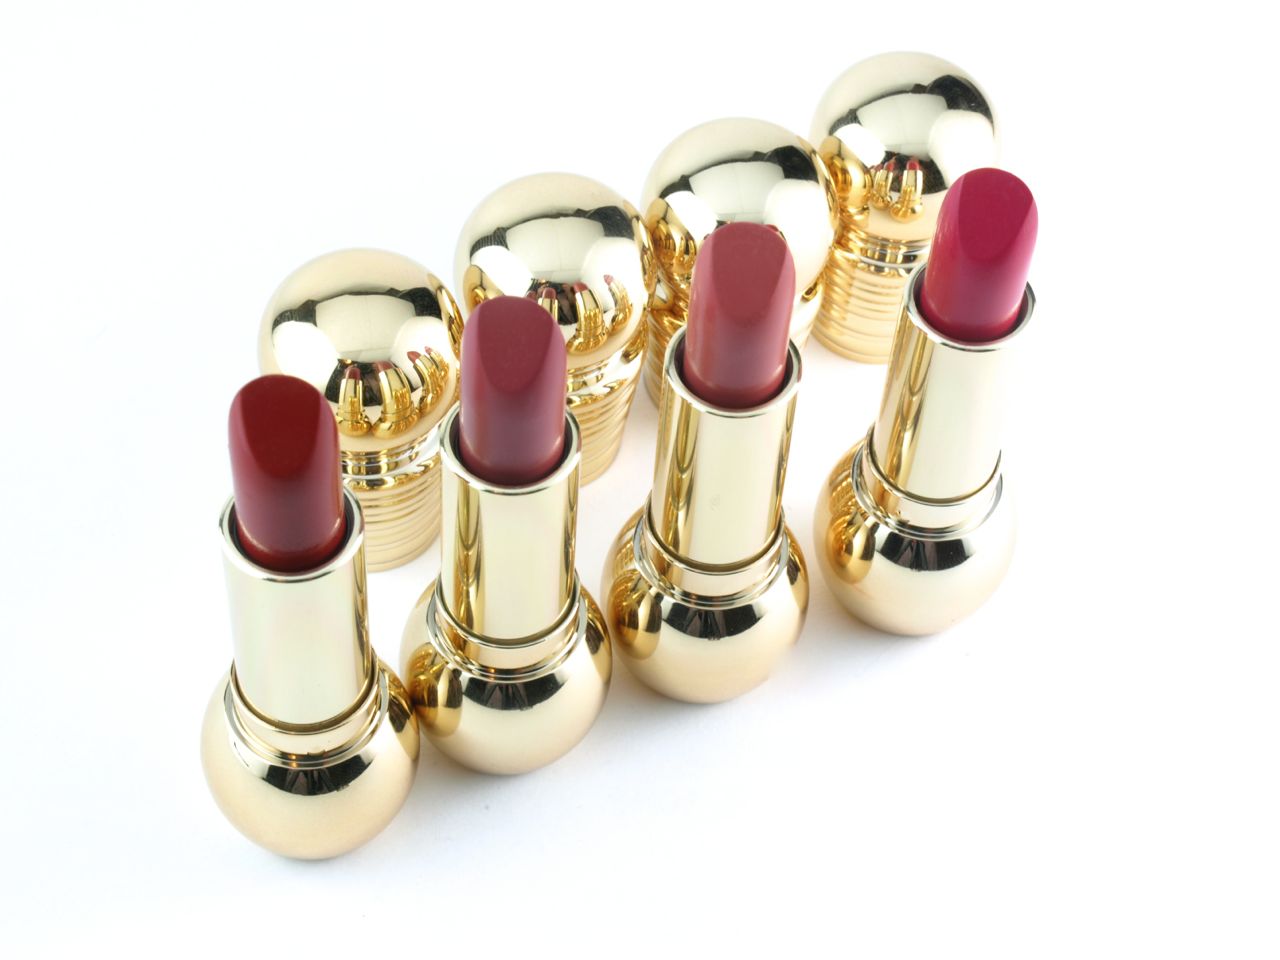 Dior Holiday 2015 Diorific Mat Velvet Color Lipsticks: Review and Swatches